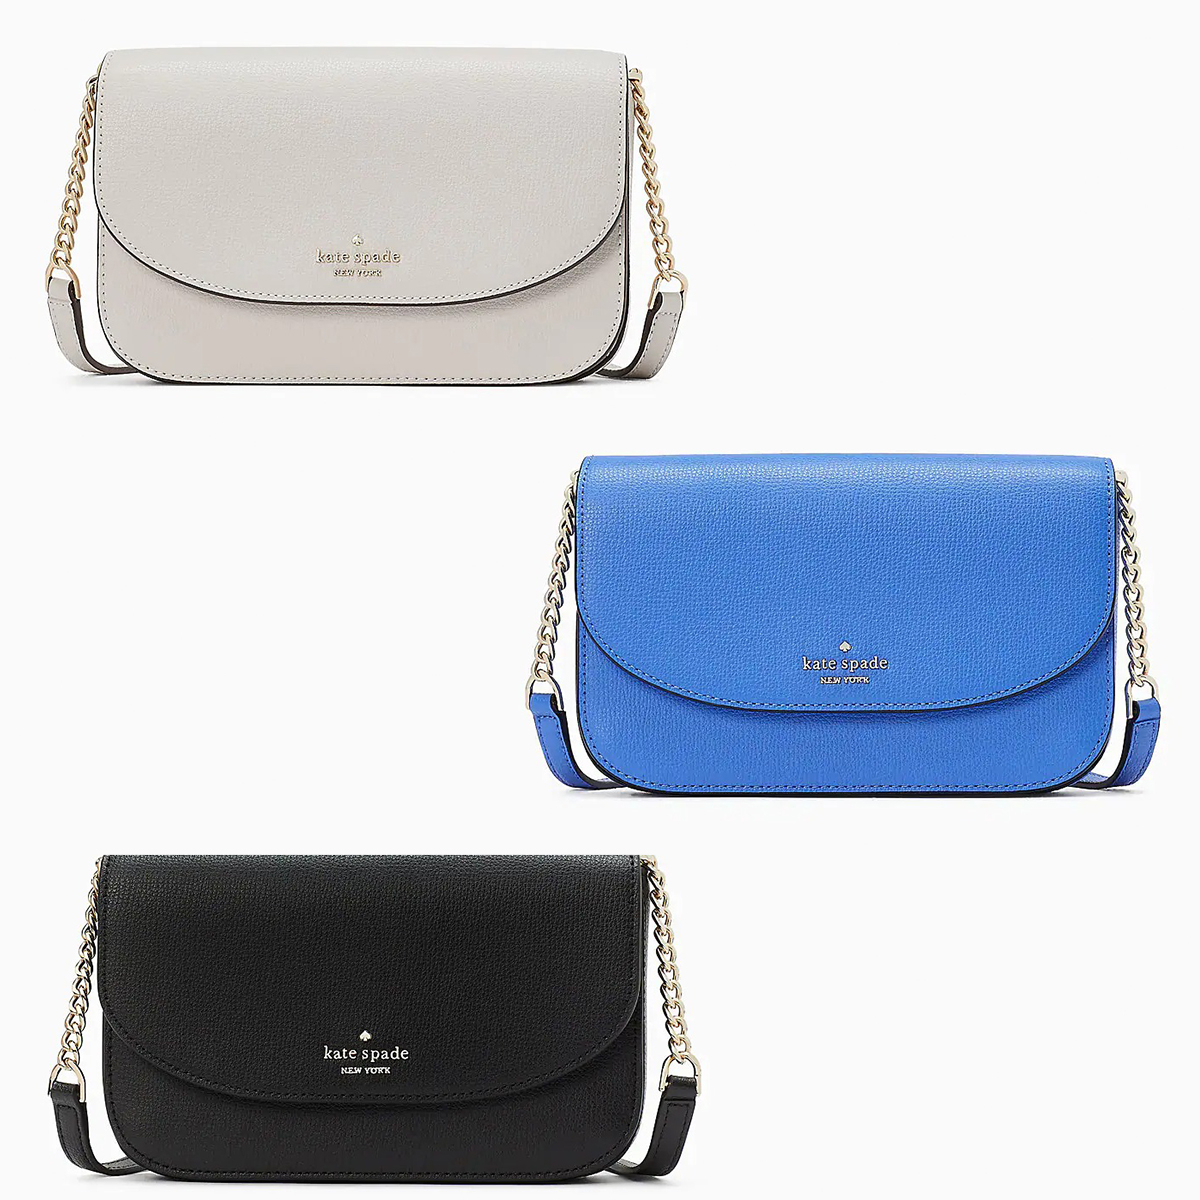 Kate Spade 24-Hour Flash Deal: Get This $250 Crossbody Bag for $49